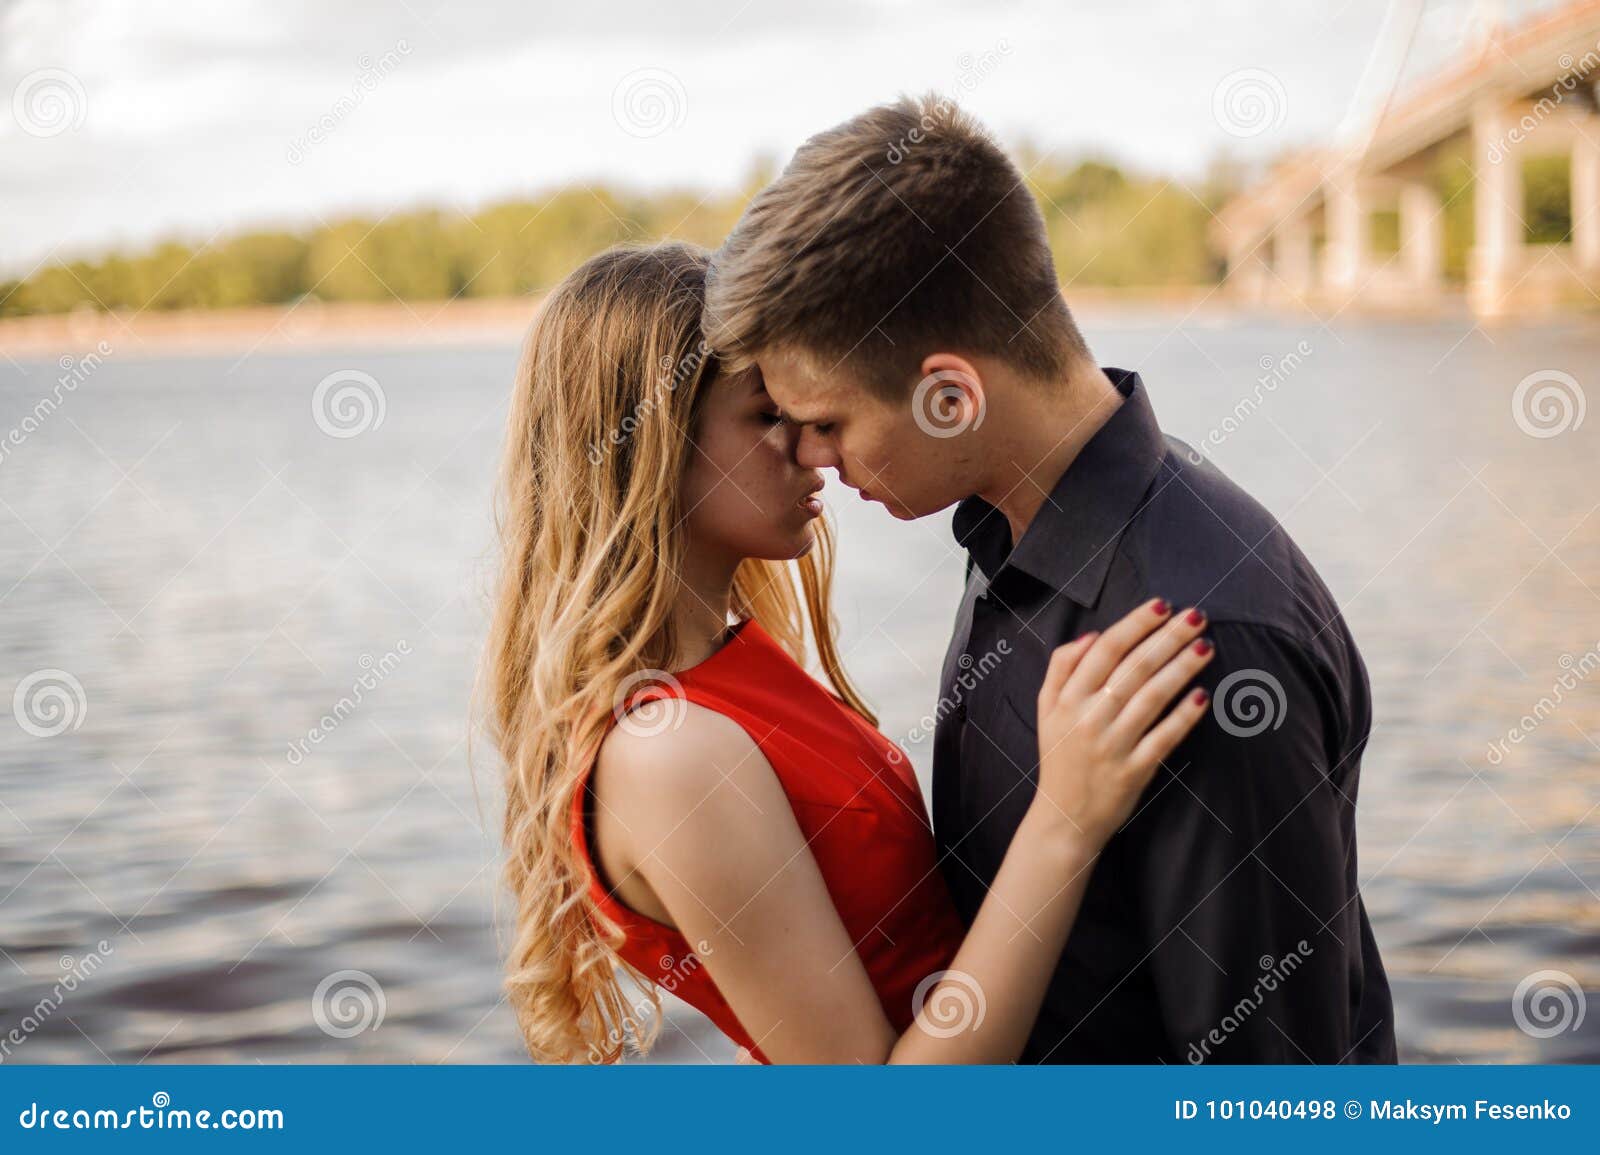 Cute Couple in Love on the Background of Water Stock Photo - Image ...